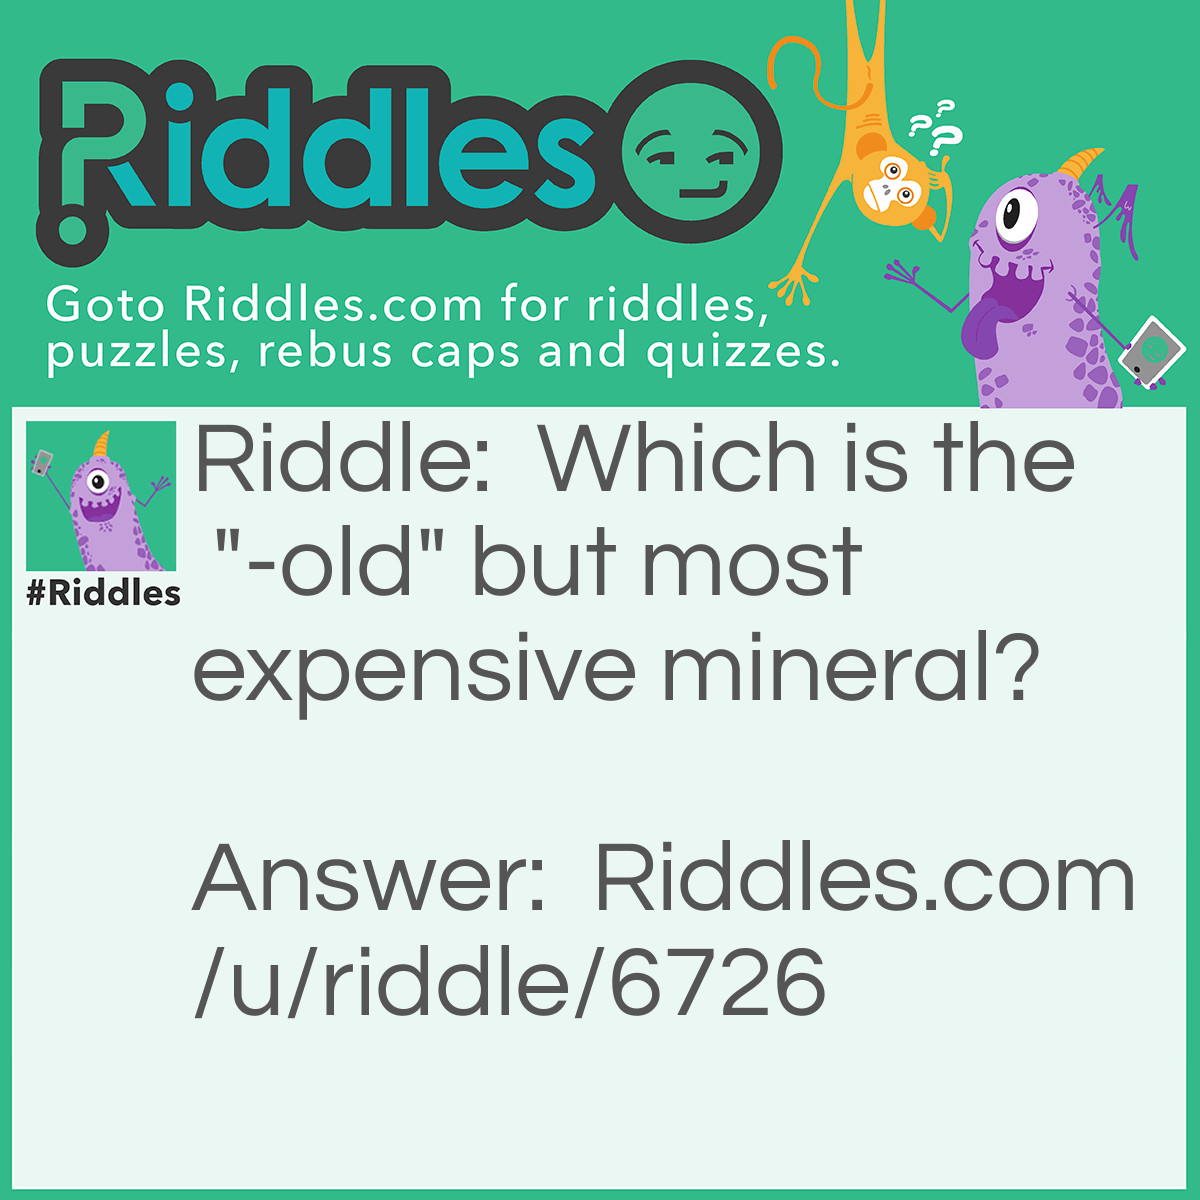 Riddle: Which is the "-old" but most expensive mineral? Answer: Gold